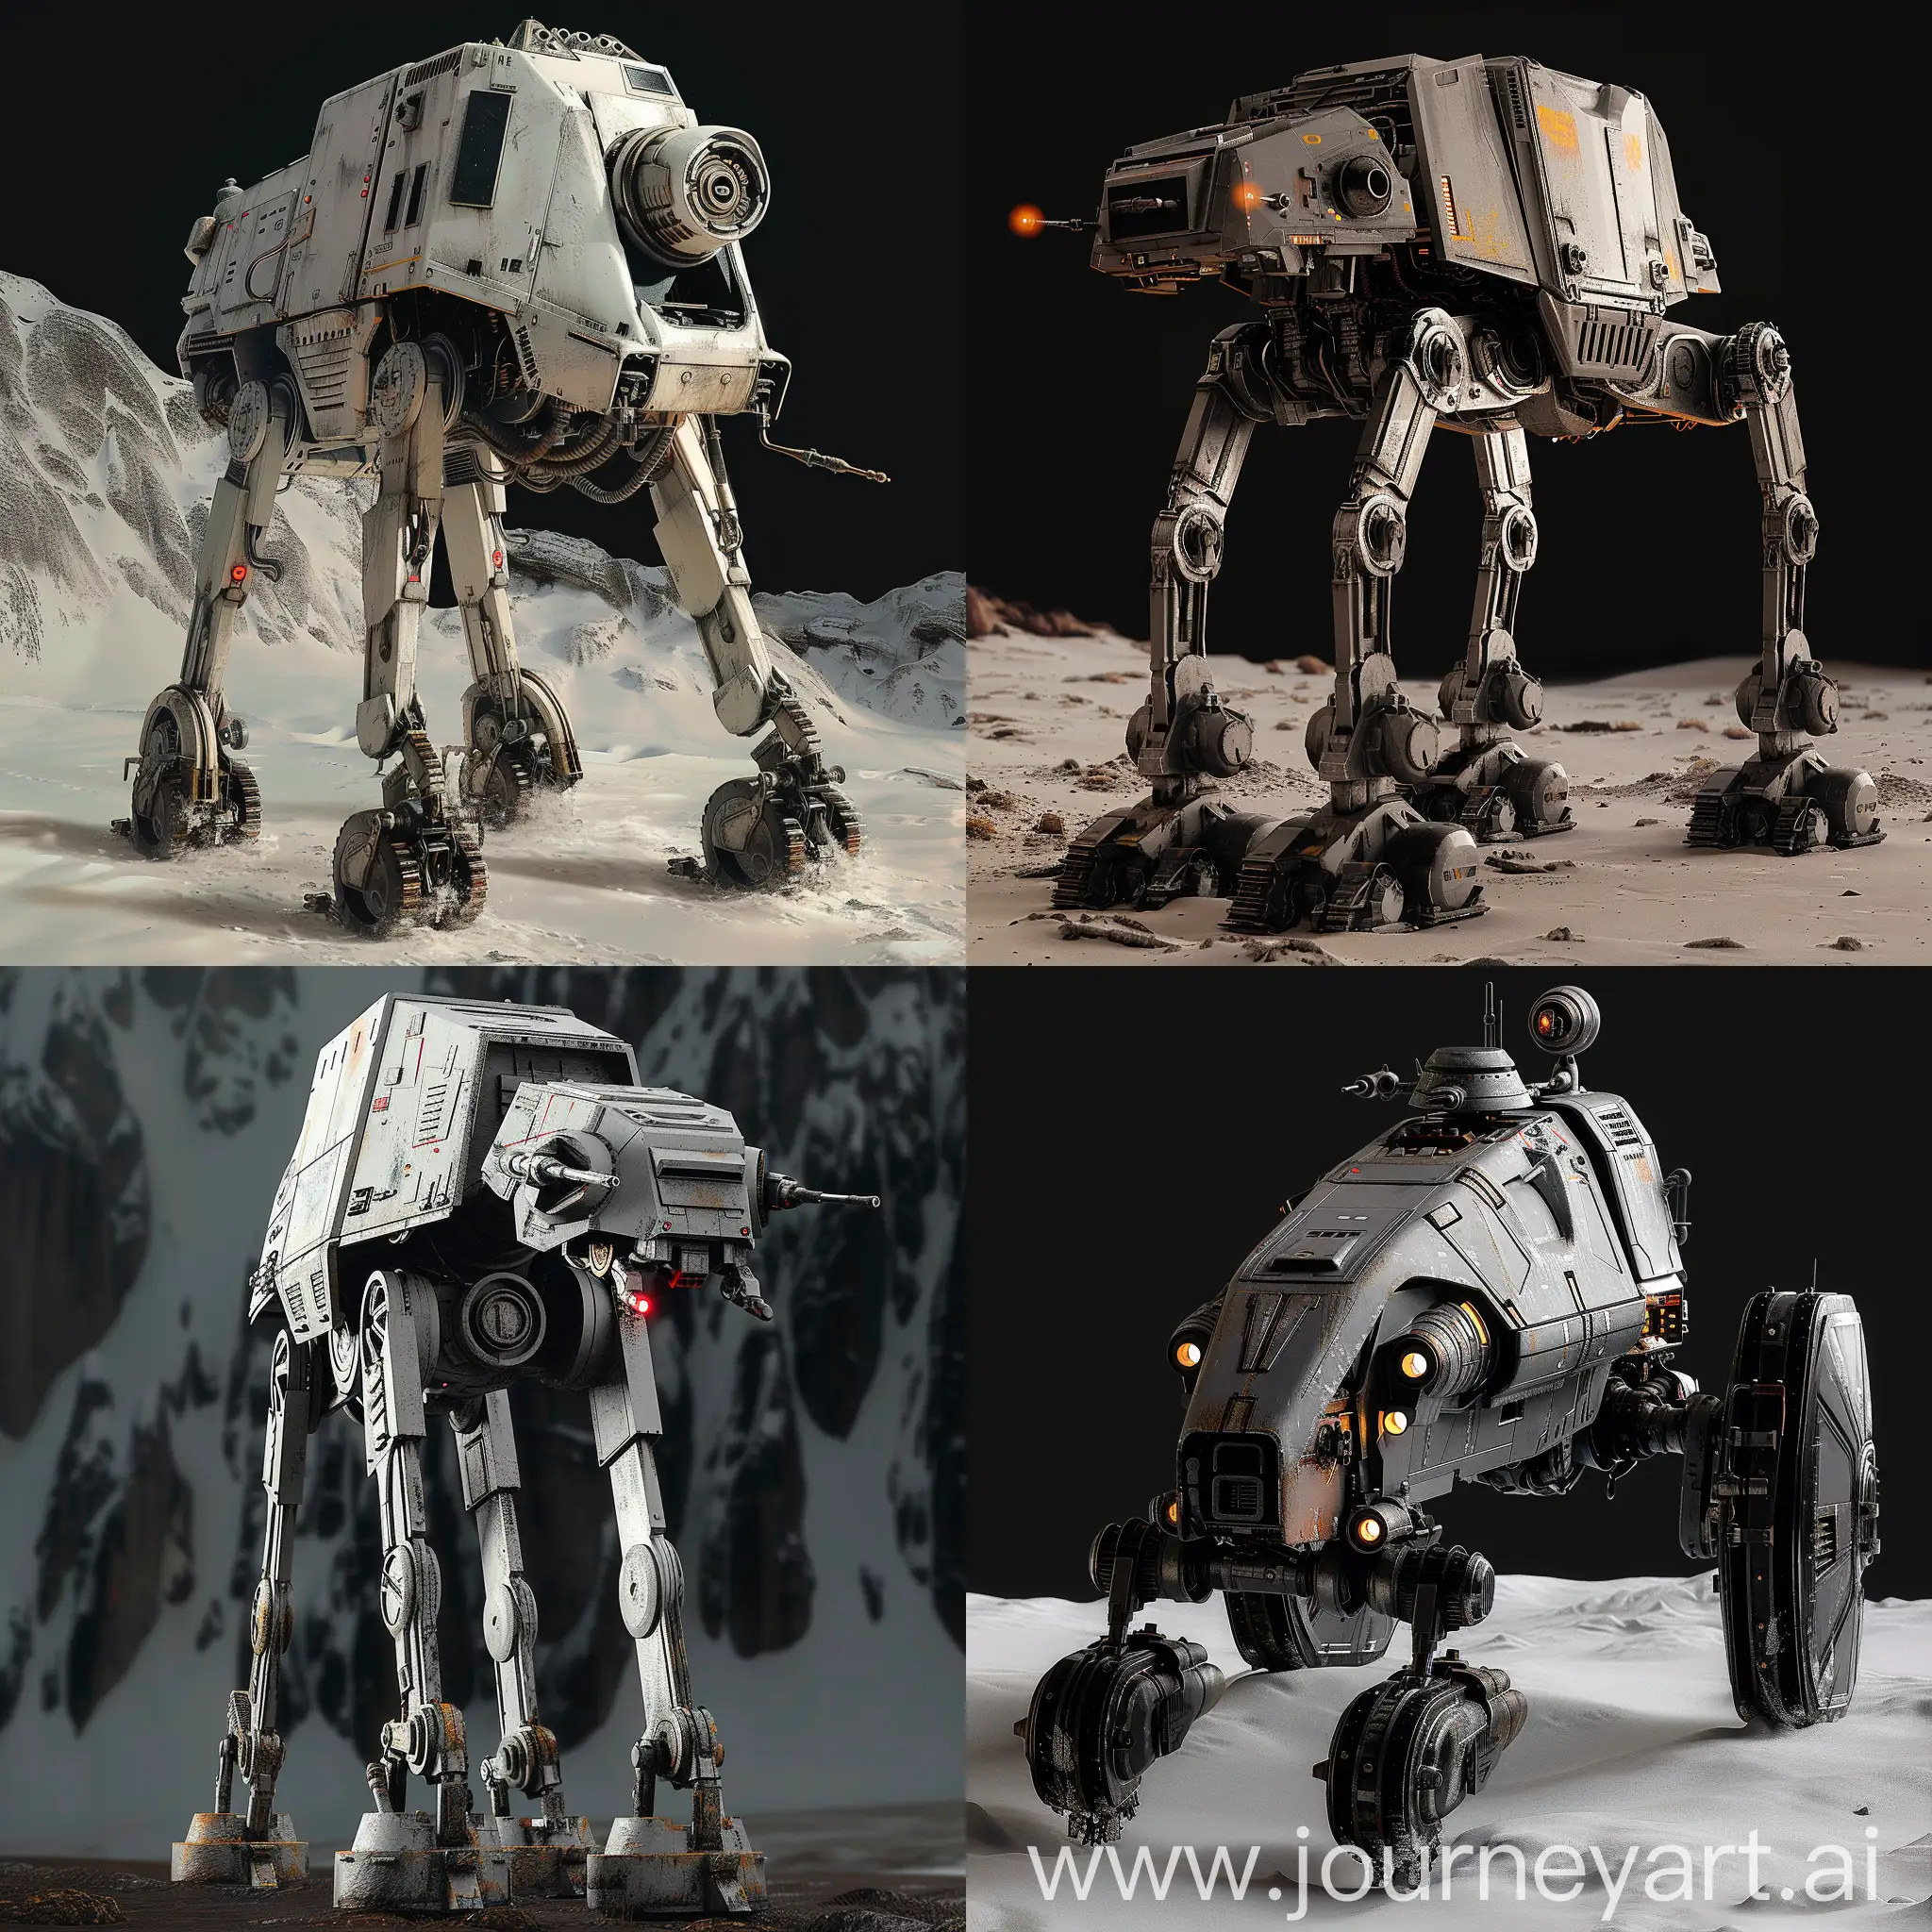 Futuristic-Star-Wars-All-Terrain-Scout-Transport-with-Advanced-AI-Navigation-and-Nanotechnology